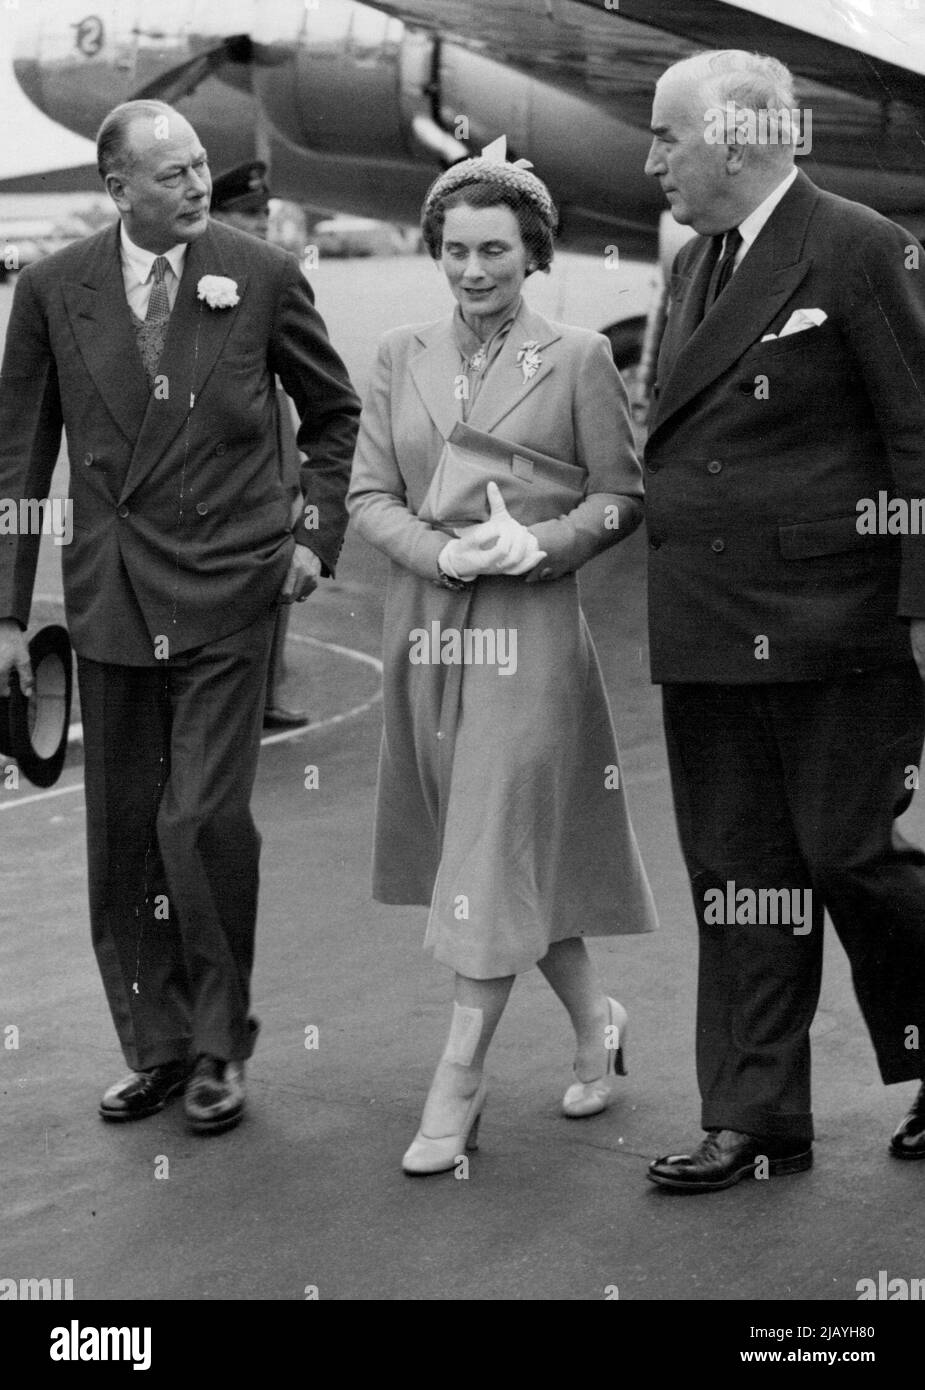 Airport Meeting -- Mr. Robert Menzies, Prime Minister of Australia - Who delayed his departure until the arrival of the Royal plane - with the Duke and Duchess of Gloucester at London Airport this evening (Tuesday) before he left for New York after his visit to Britain Mr. Menzies held up his plane until the Duke of Gloucester, a former Governor-General of Australia, flew in front in from Northern Ireland. The Australian Prime Minister is returning home via America in order it is understood, the have talks with Mr. Dean Acheson. June 17, 1952. (Photo by Reuterphoto). Stock Photo